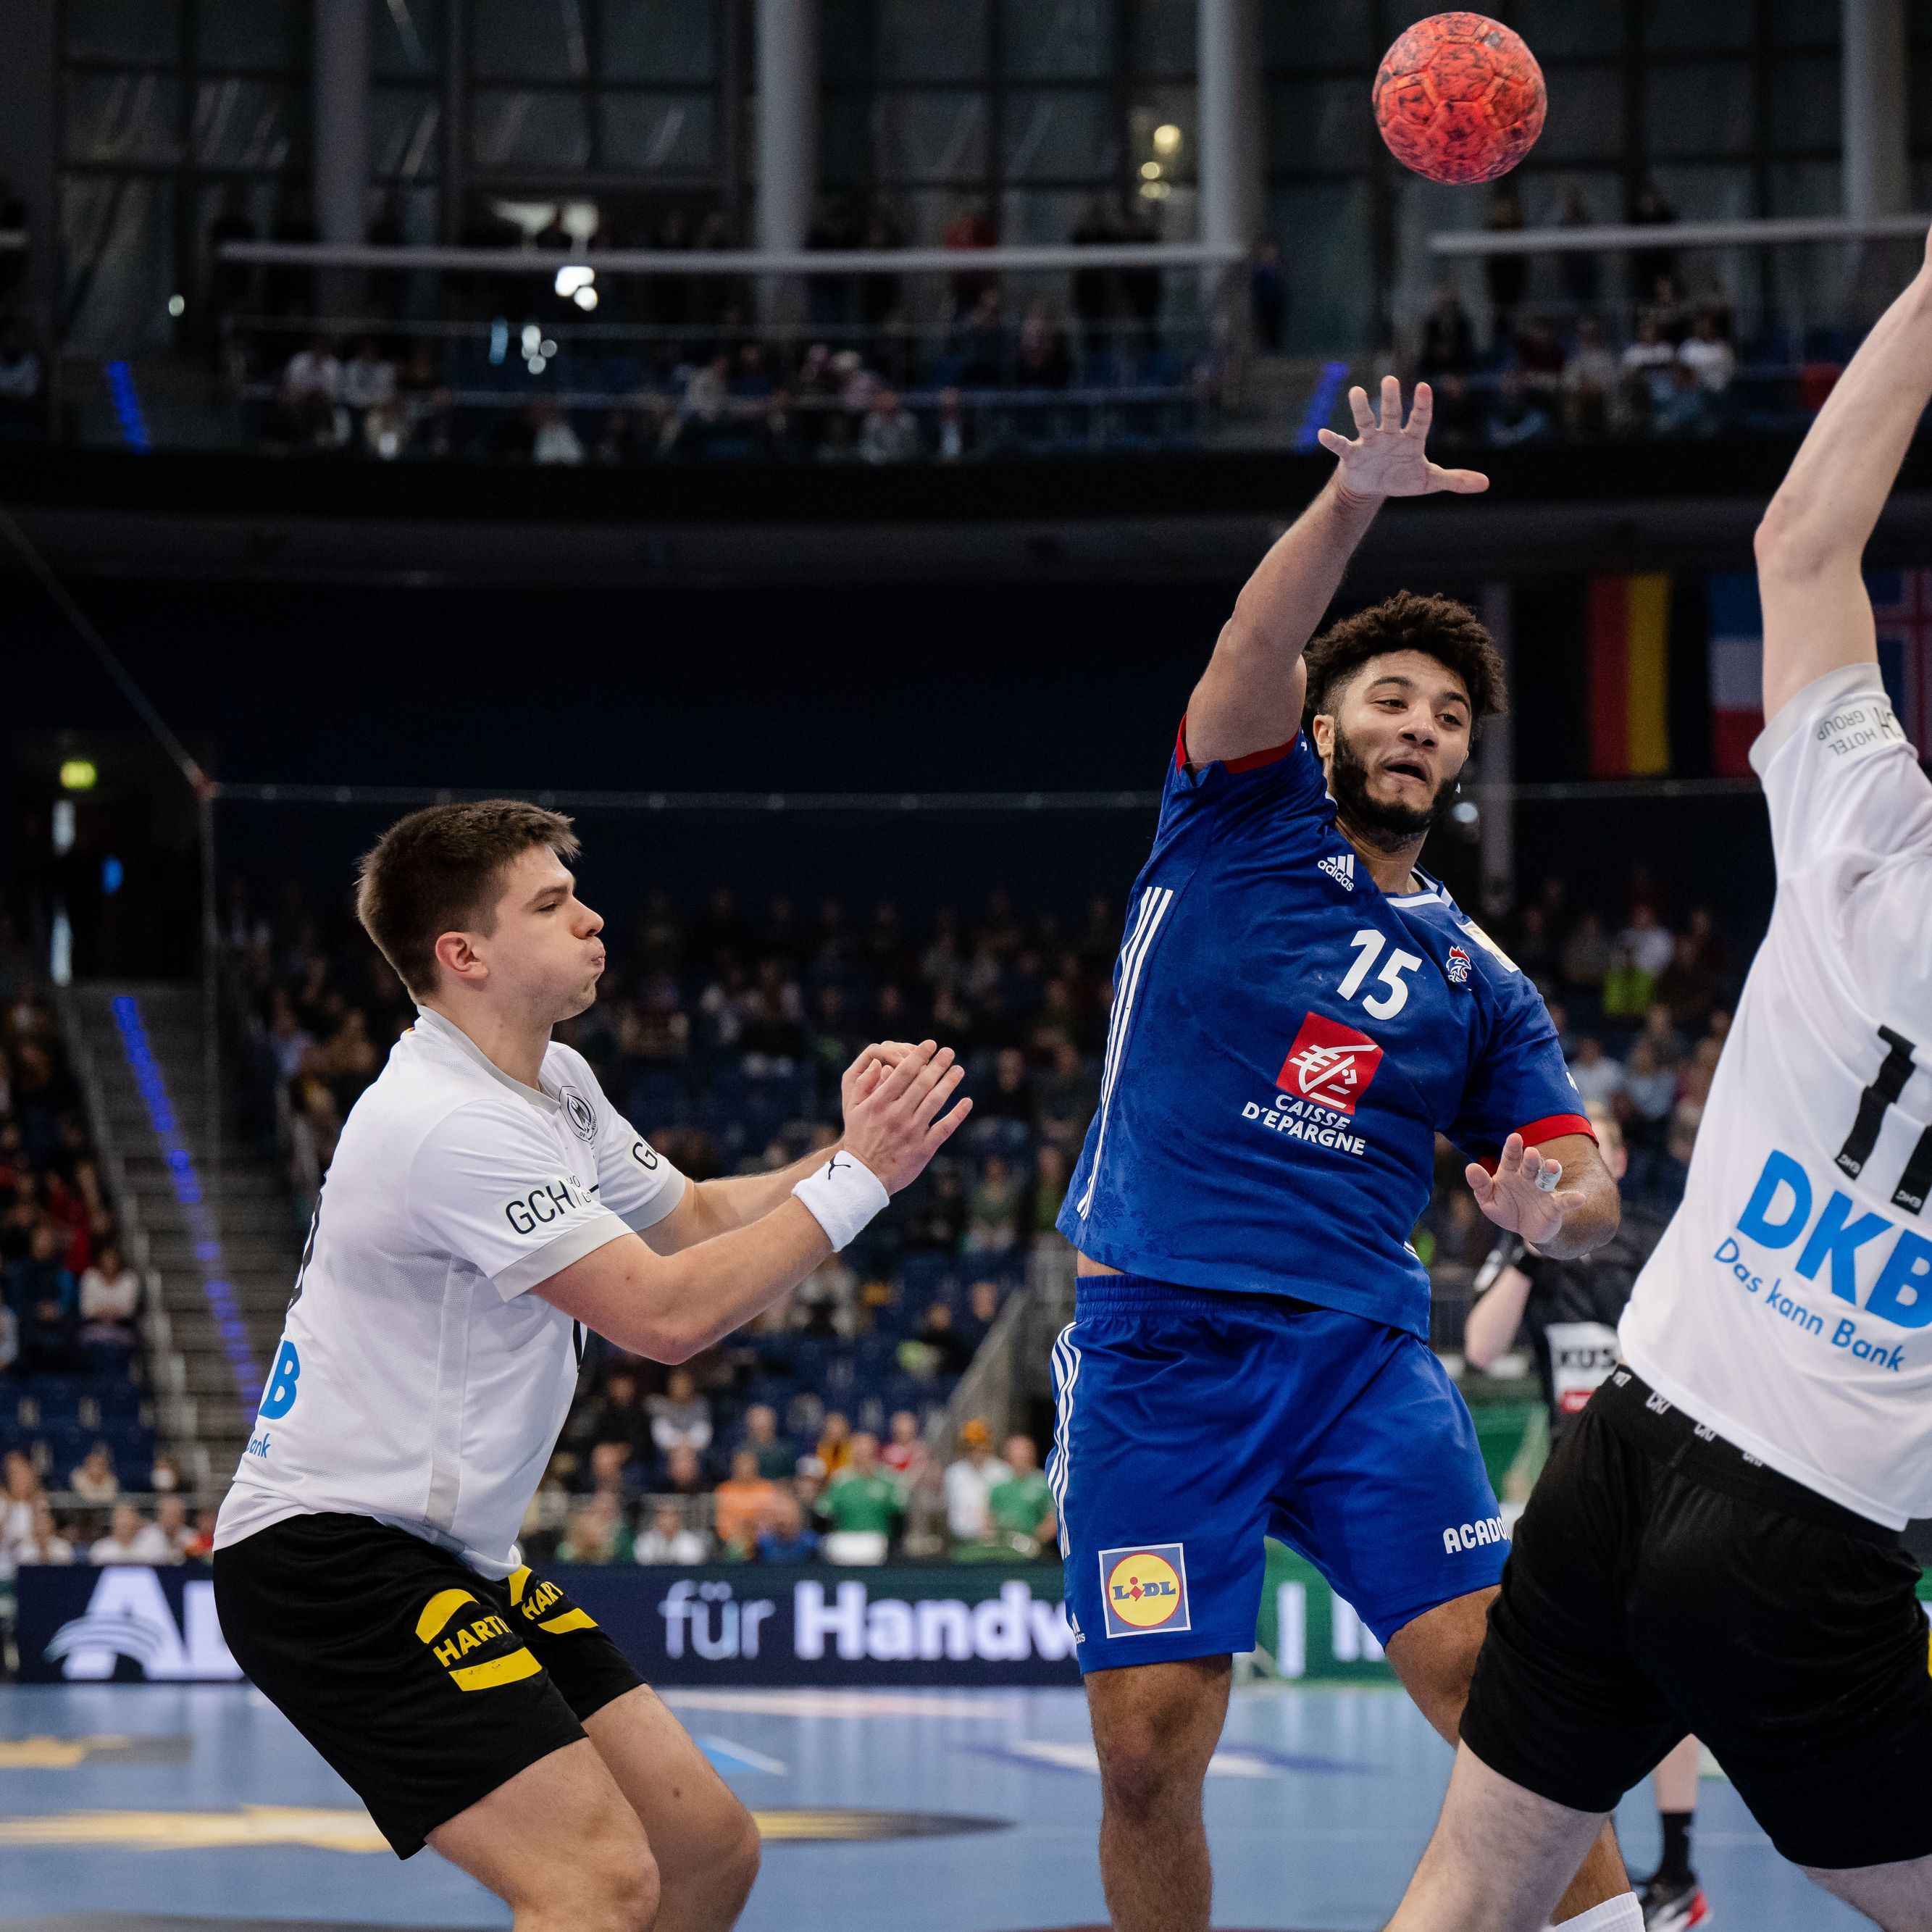 IHF bestätigt: Olympia-Quali in Hannover